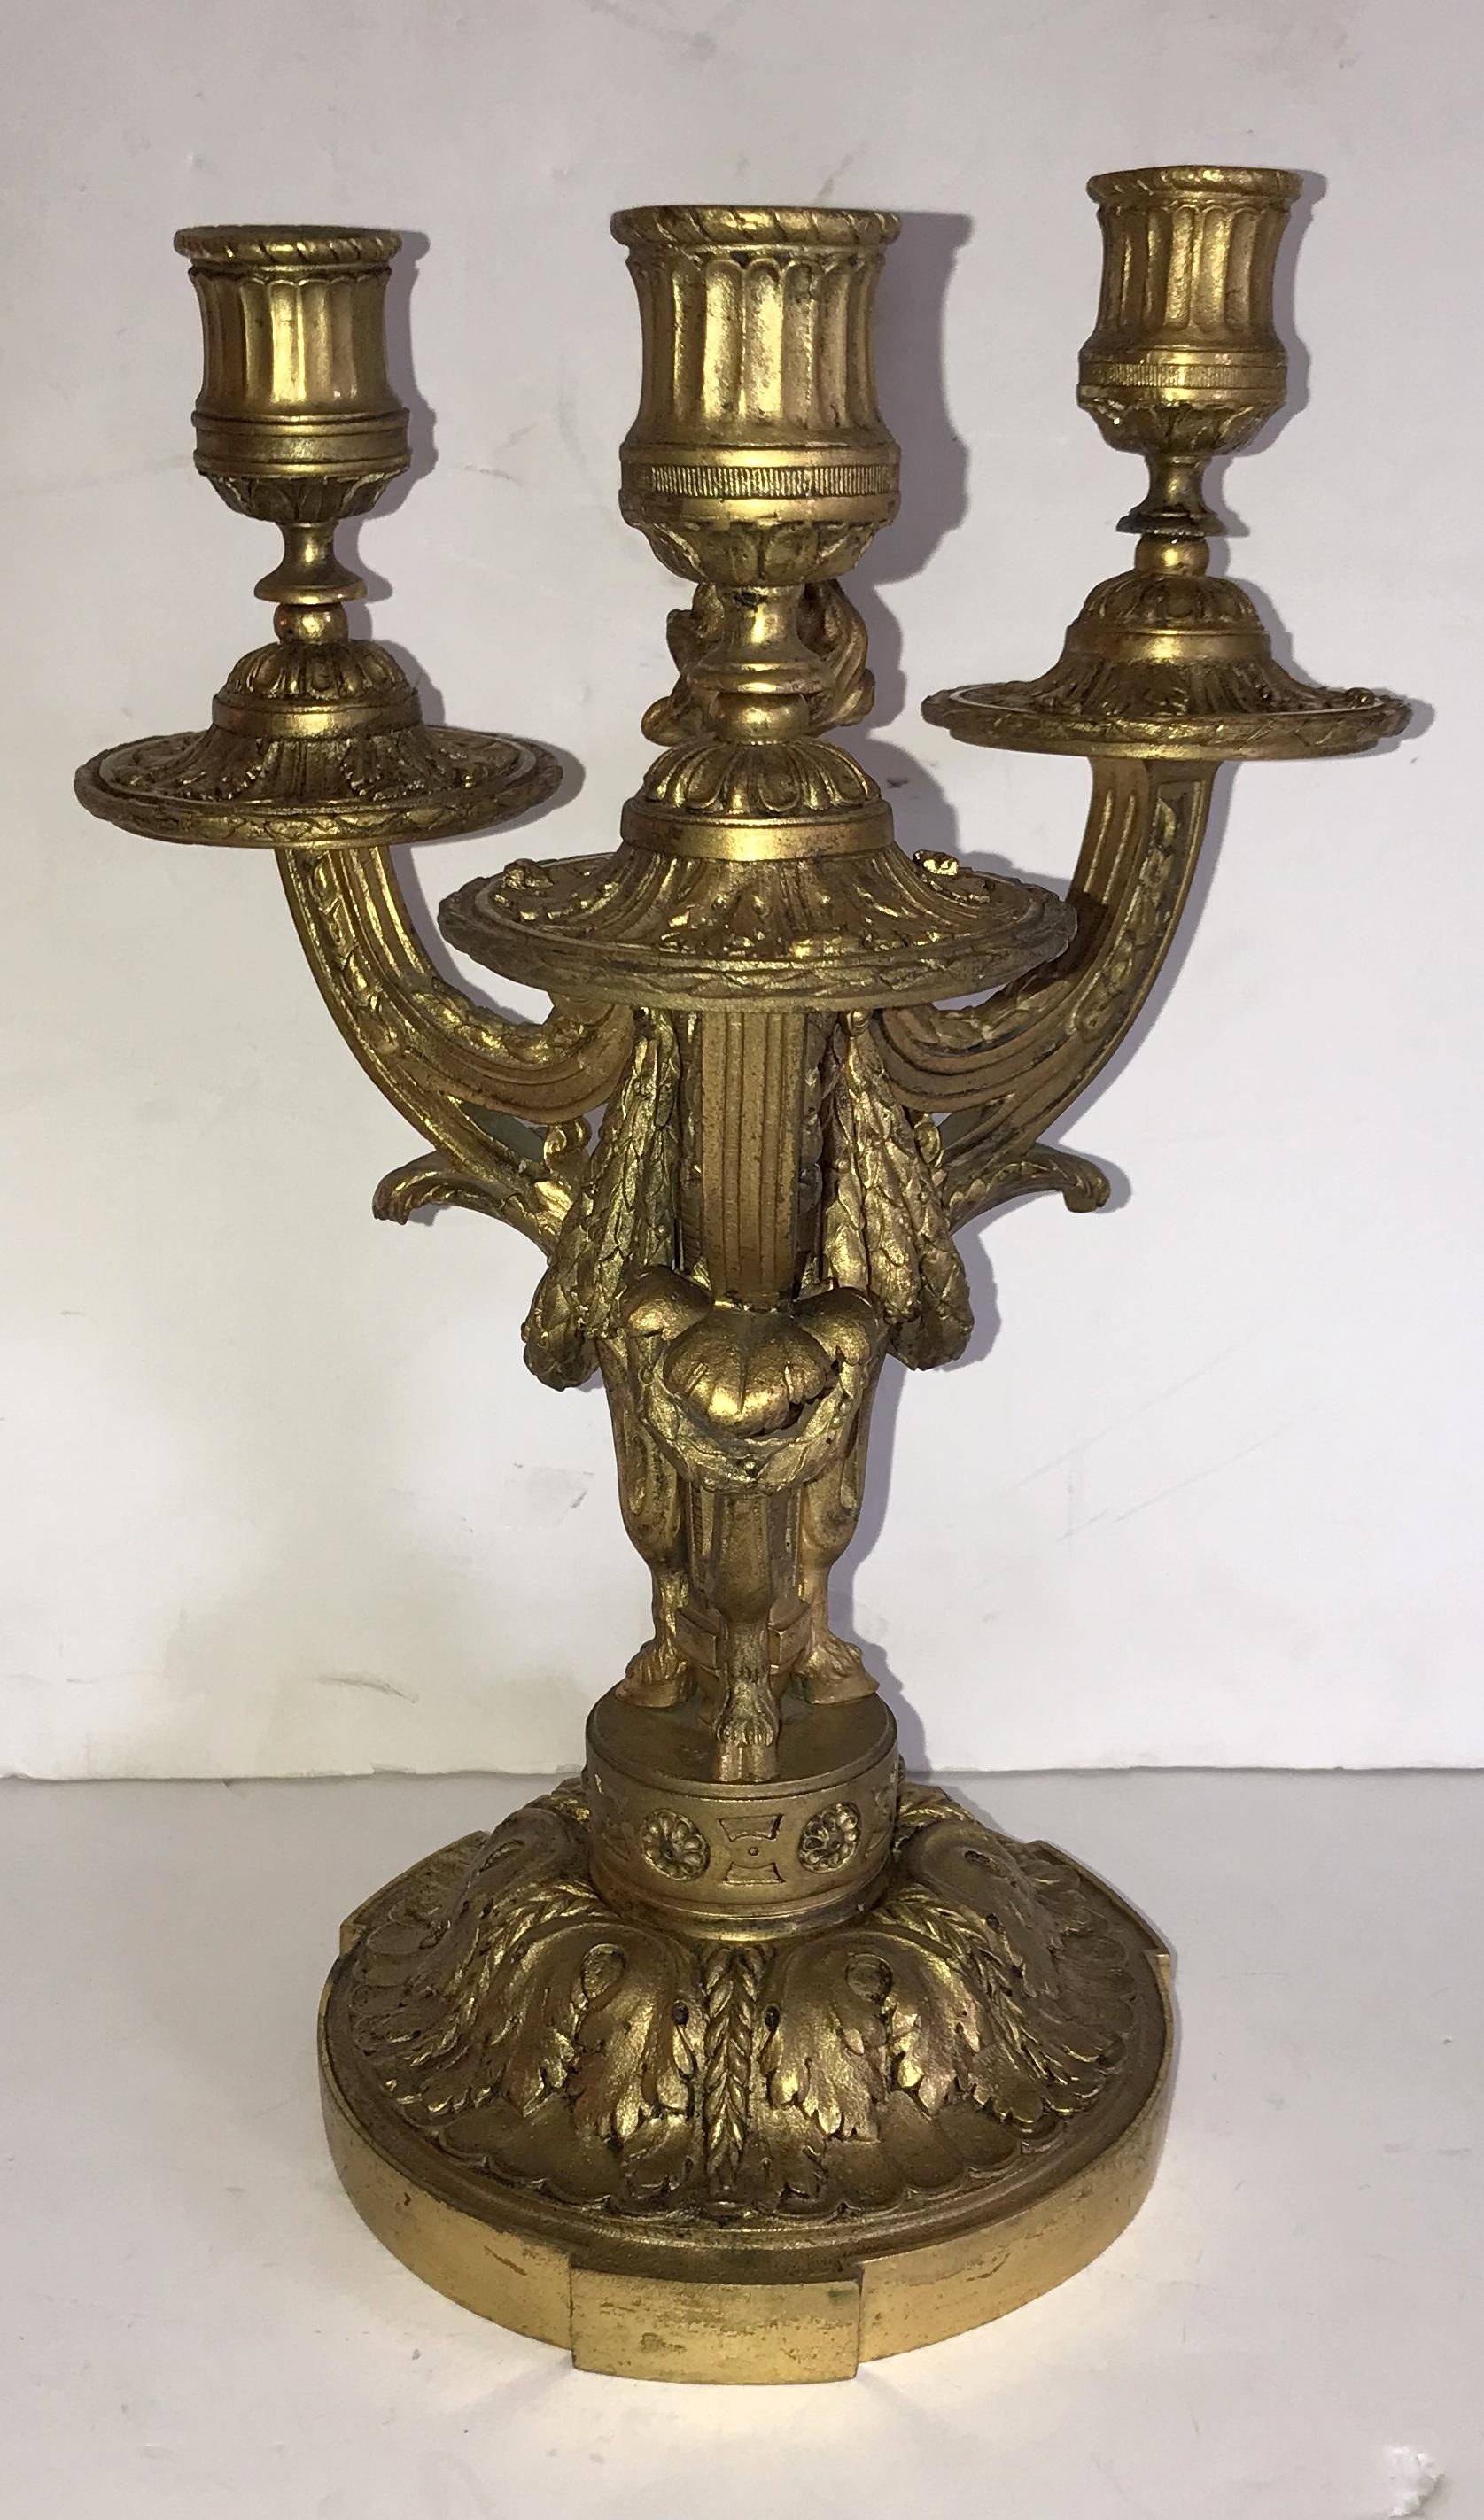 A wonderful pair of French gold gilt doré bronze neoclassical three-arm Candelabra in the manner of E.F. Caldwell, with very fine detail throughout.